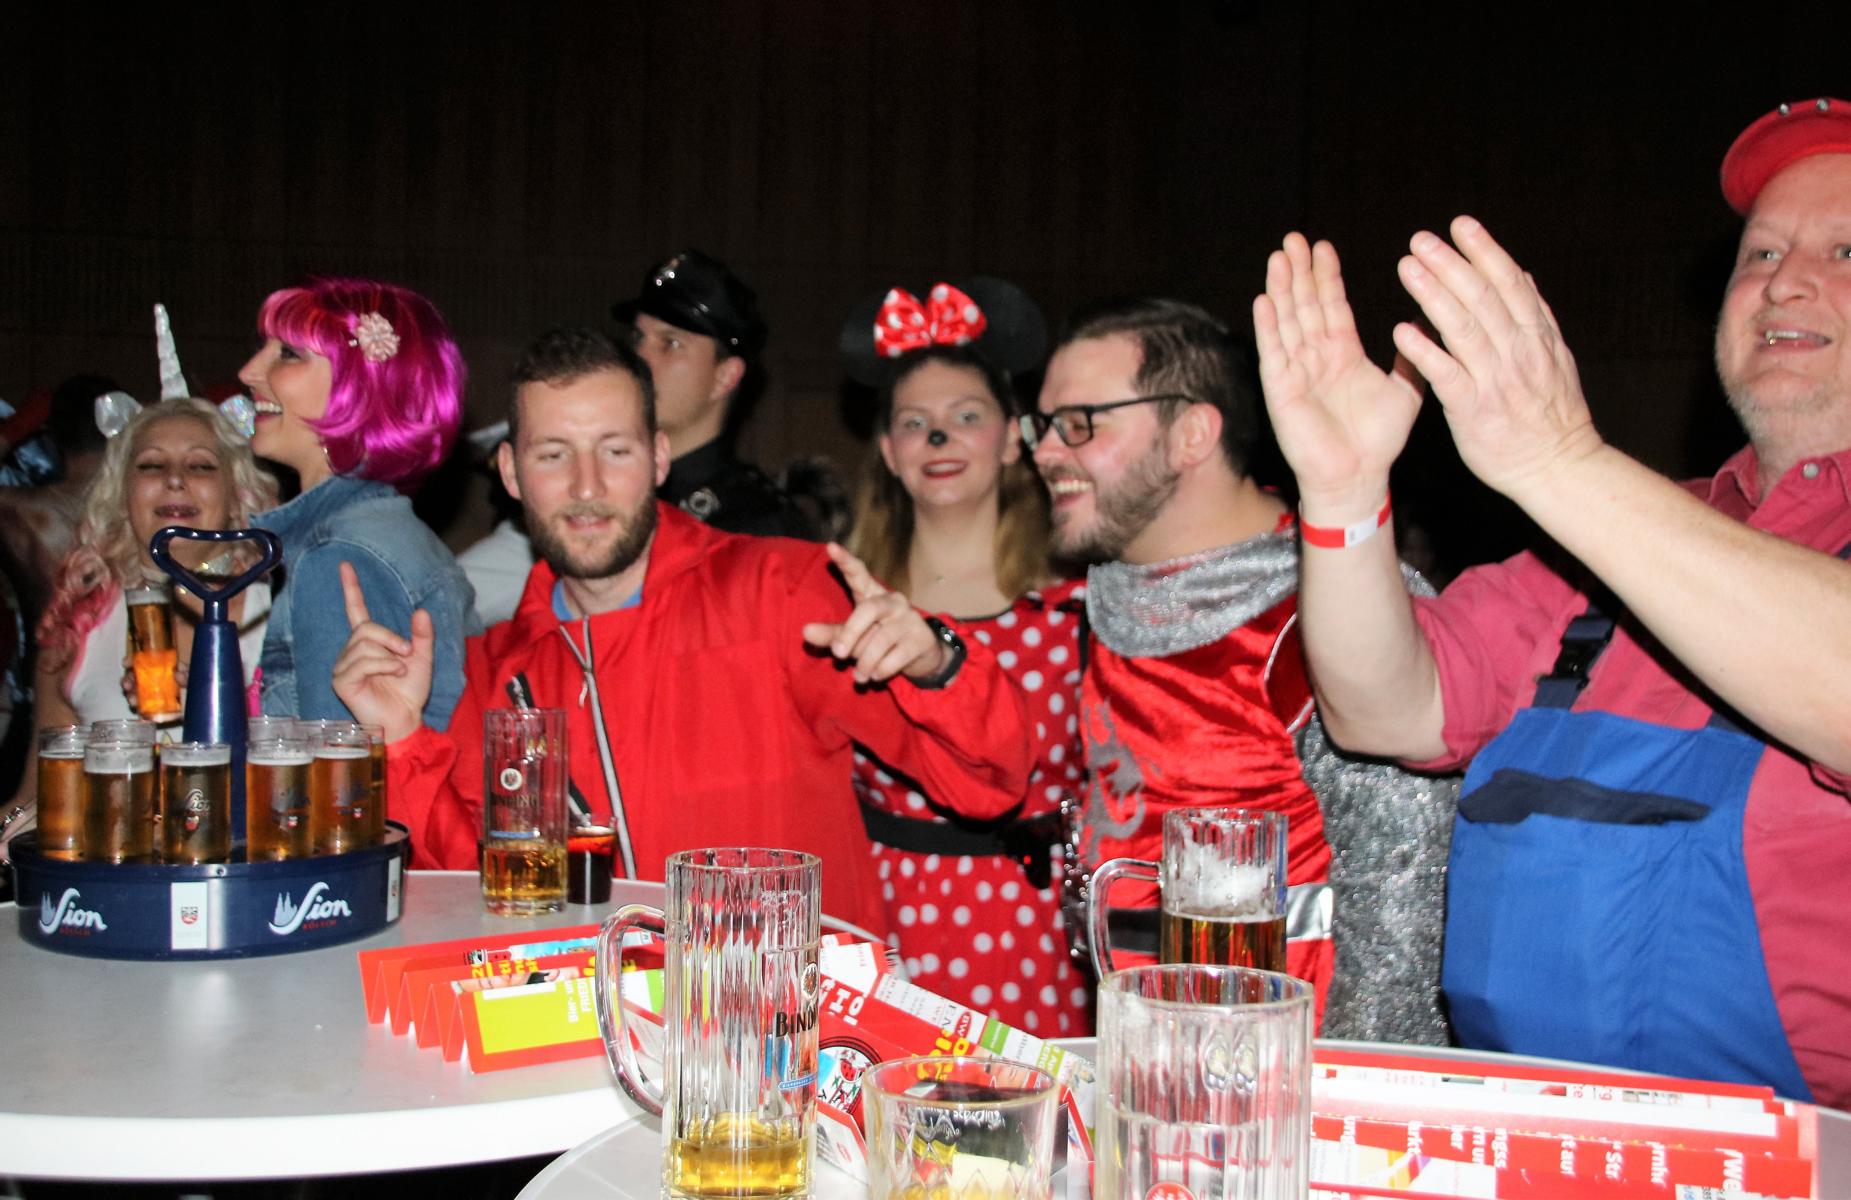 ROY HAMMER PARTY DER BERNEMER KWWERN. < >< >FOTOS: 2019-03-04 Fastnacht Roy-Hammer-Party I< >



FOTOS: 2019-03-04 Fastnacht Roy-Hammer-Party II< >